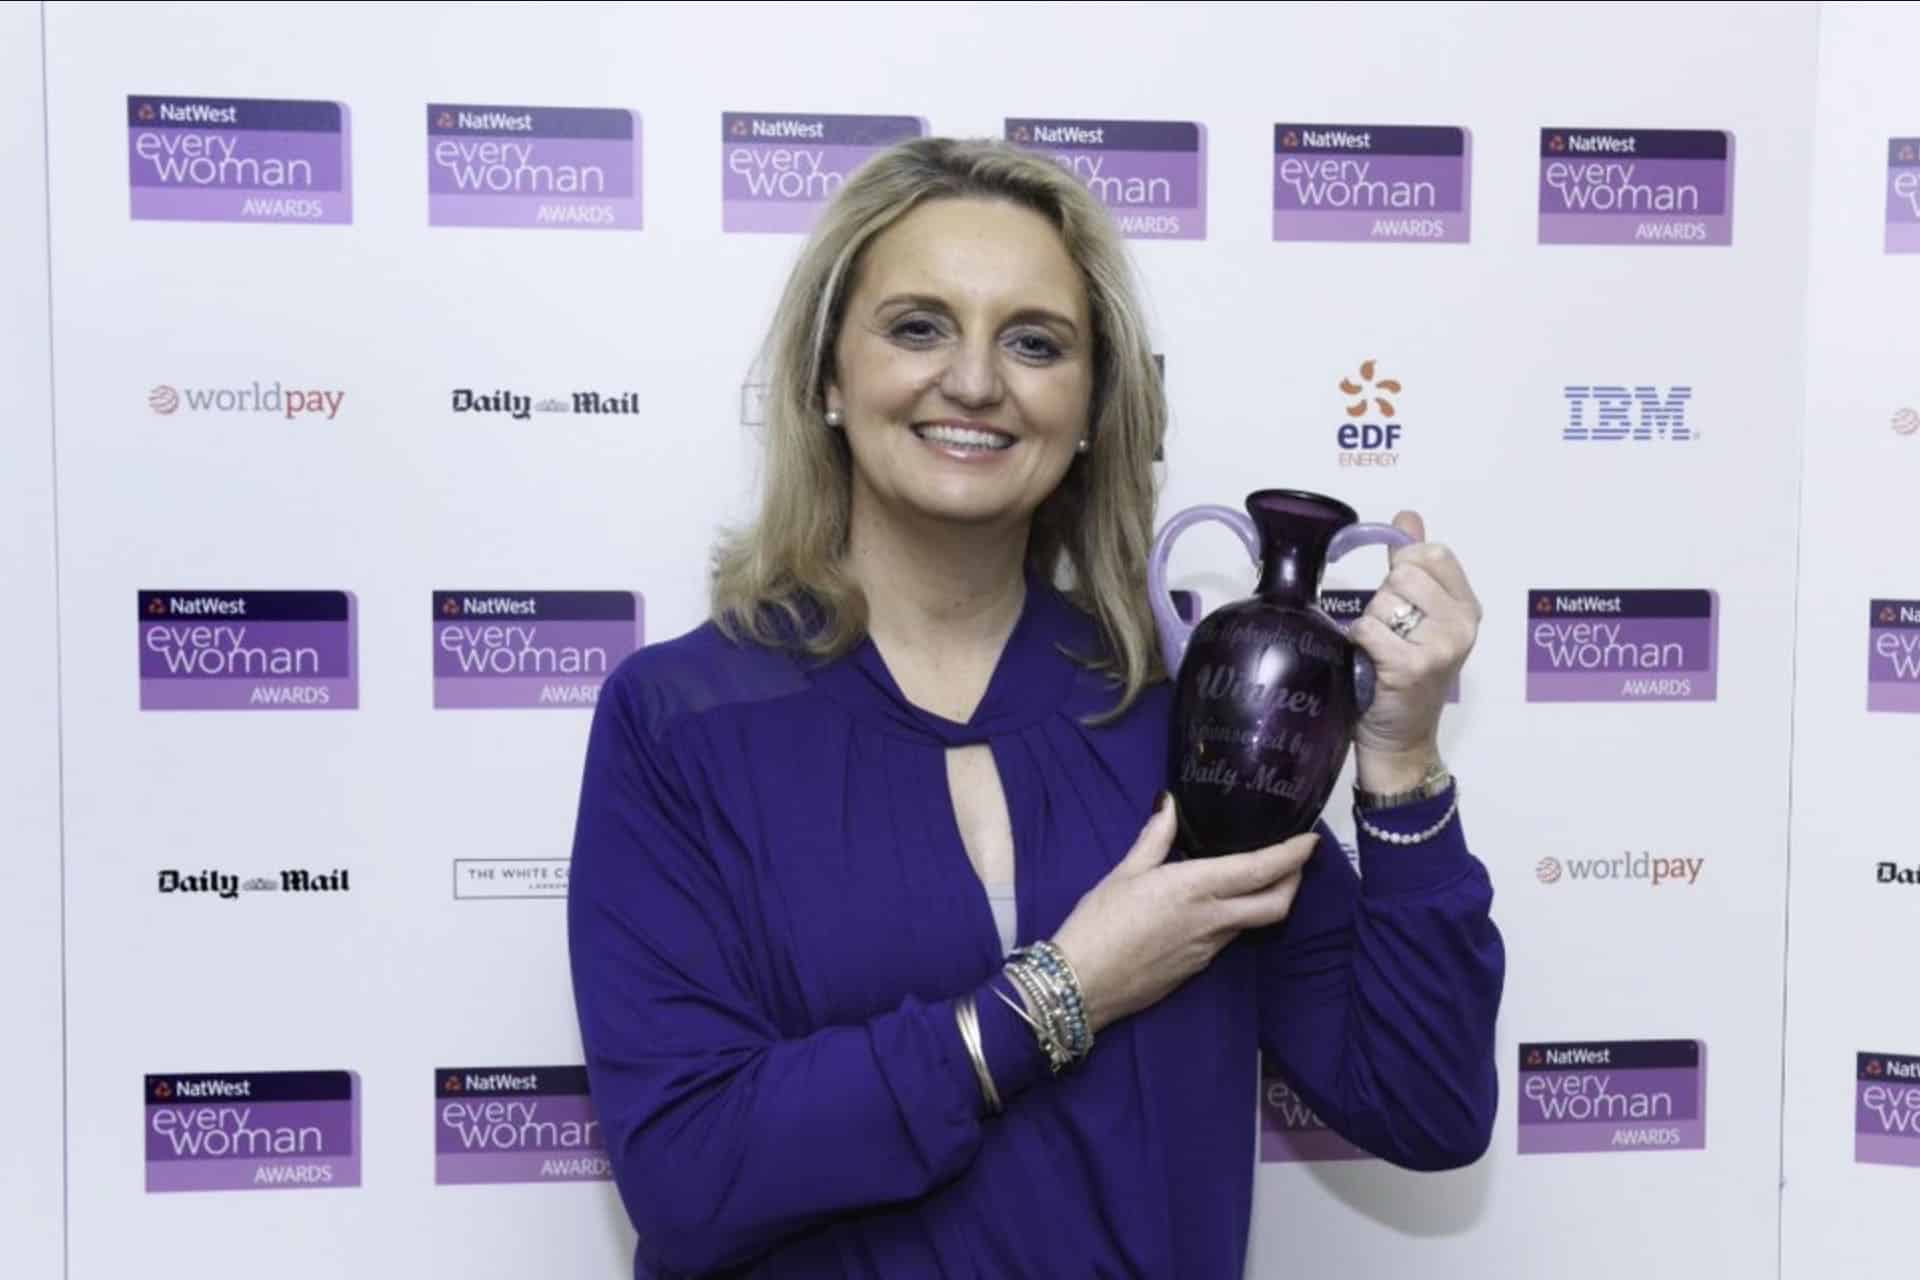 Natwest Everywoman Aphrodite Female Entrepreneur of 2015 - sponsored by Daily Mail